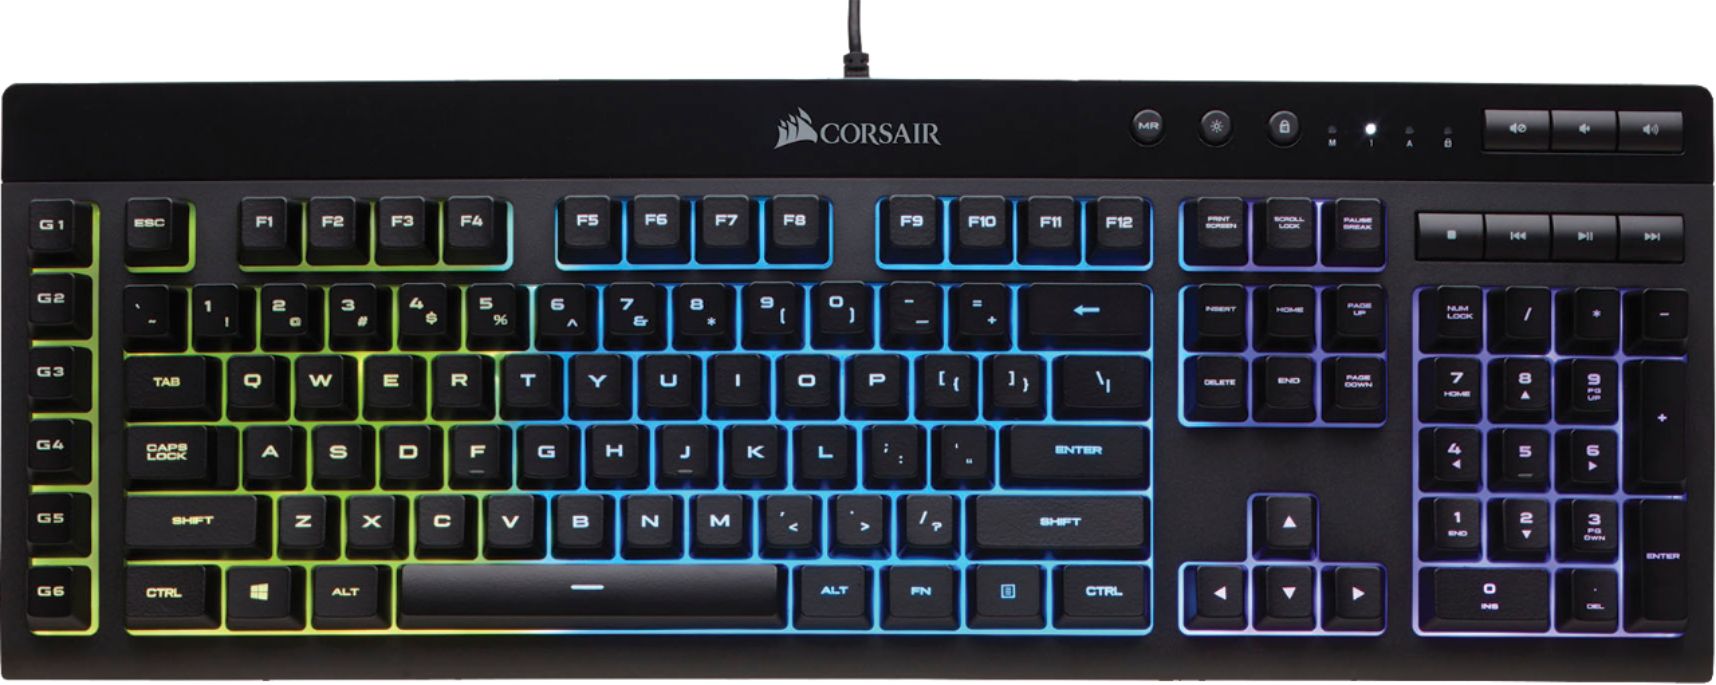 Left View: CORSAIR - Refurbished K55 Full-size Wired Membrane Gaming Keyboard with RGB Backlighting